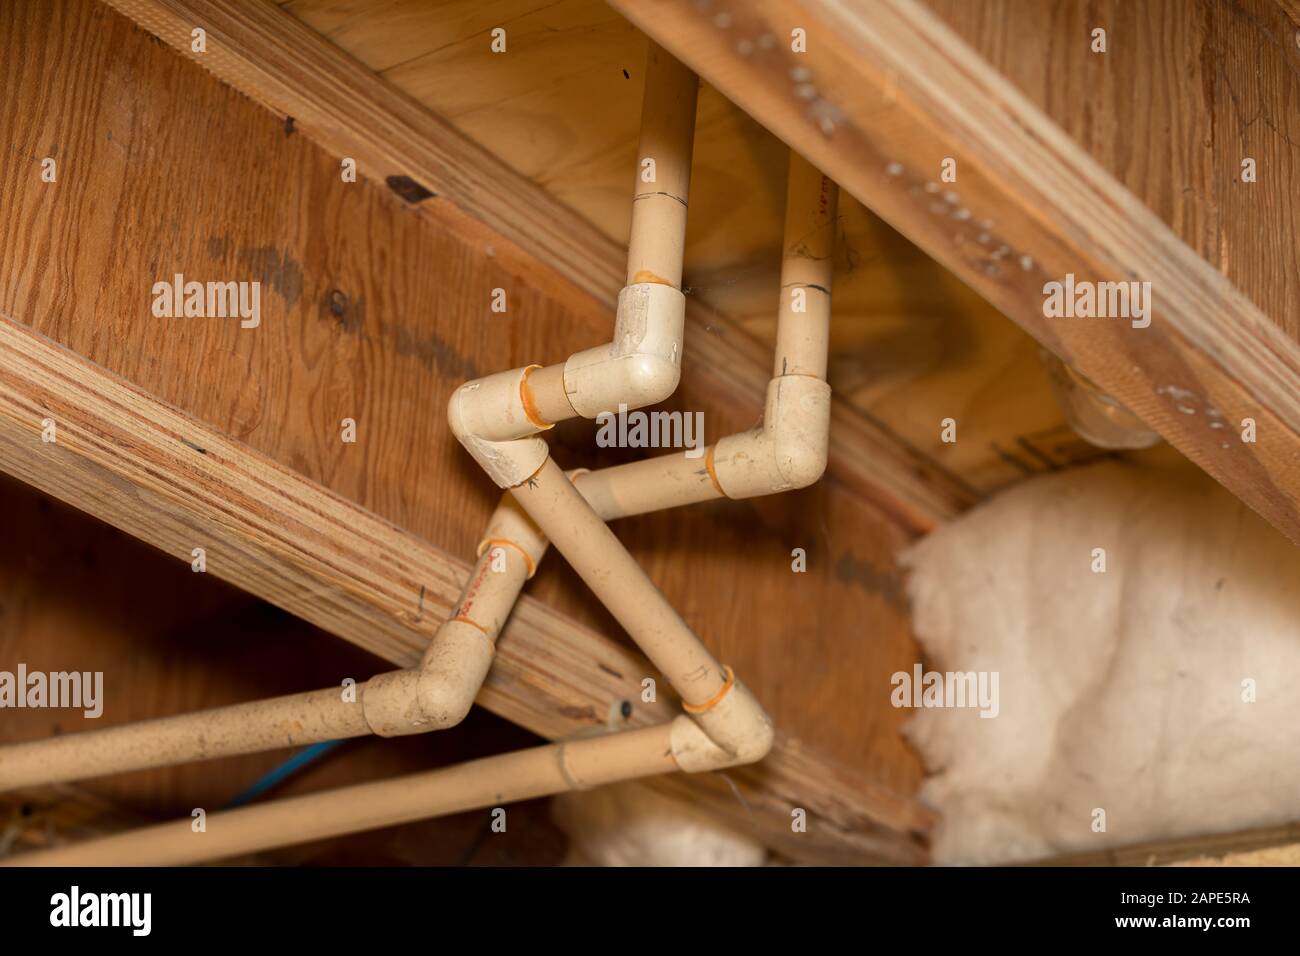 Old PVC plastic water supply pipes installed under house in crawlspace. Hot and cold water plumbing system for bathroom sink and shower Stock Photo